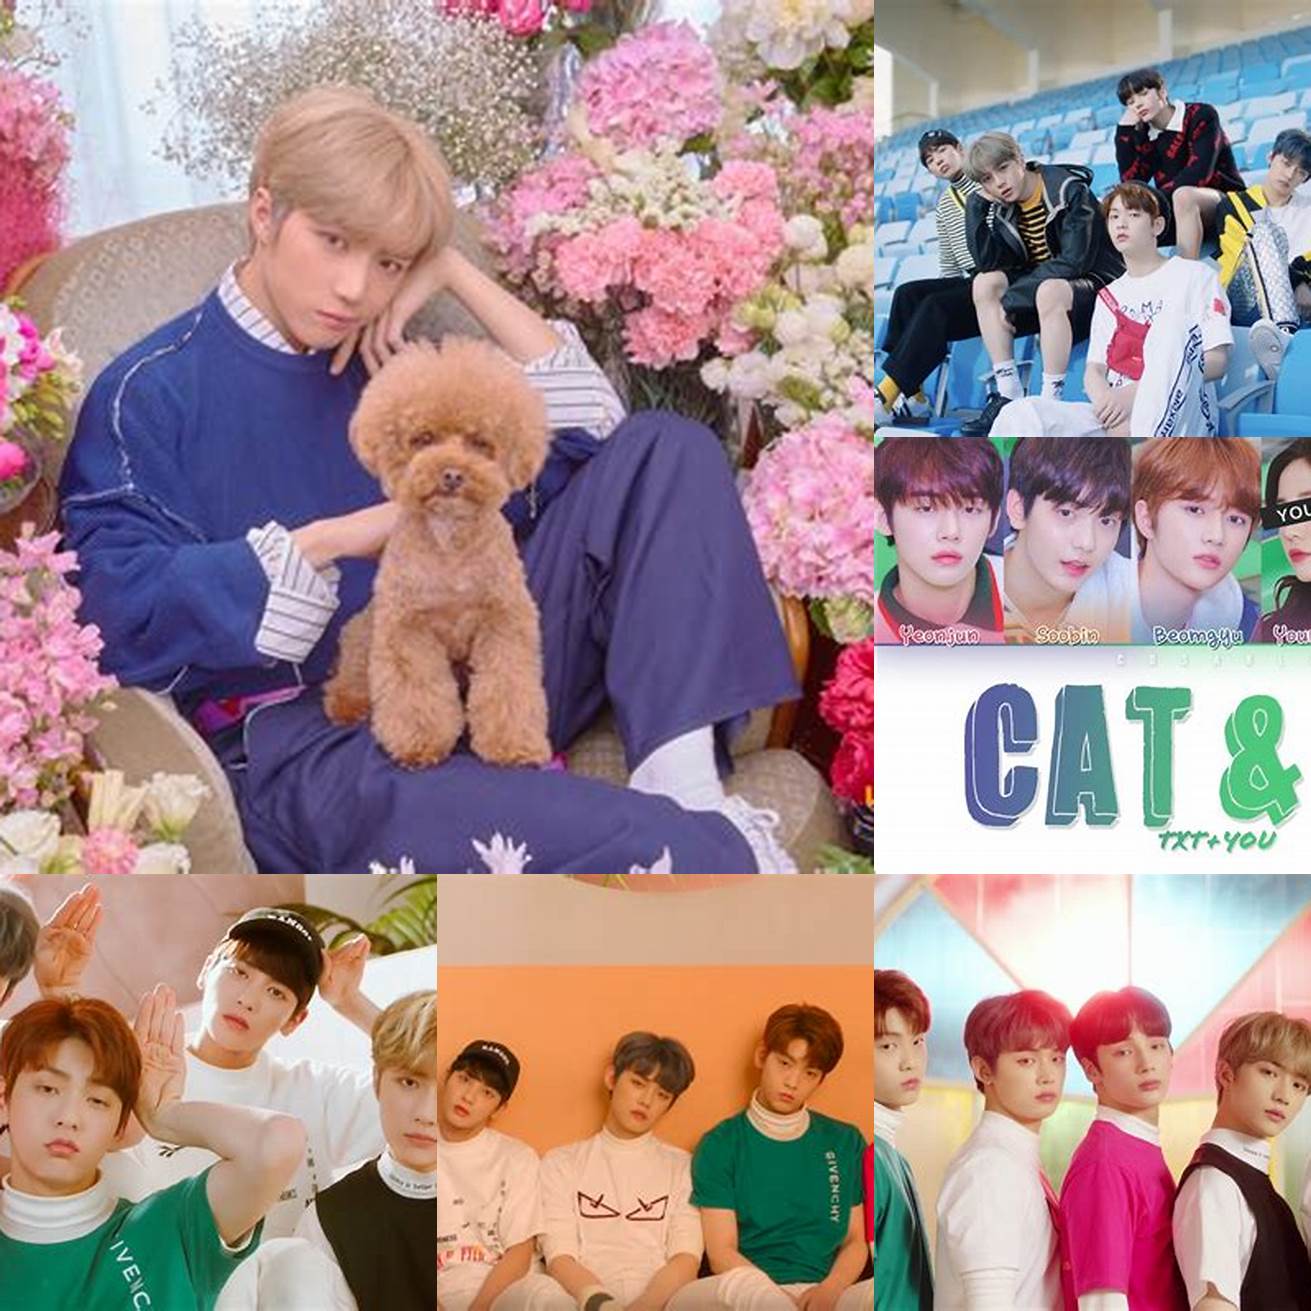 4 A photo of the TXT members with their pets